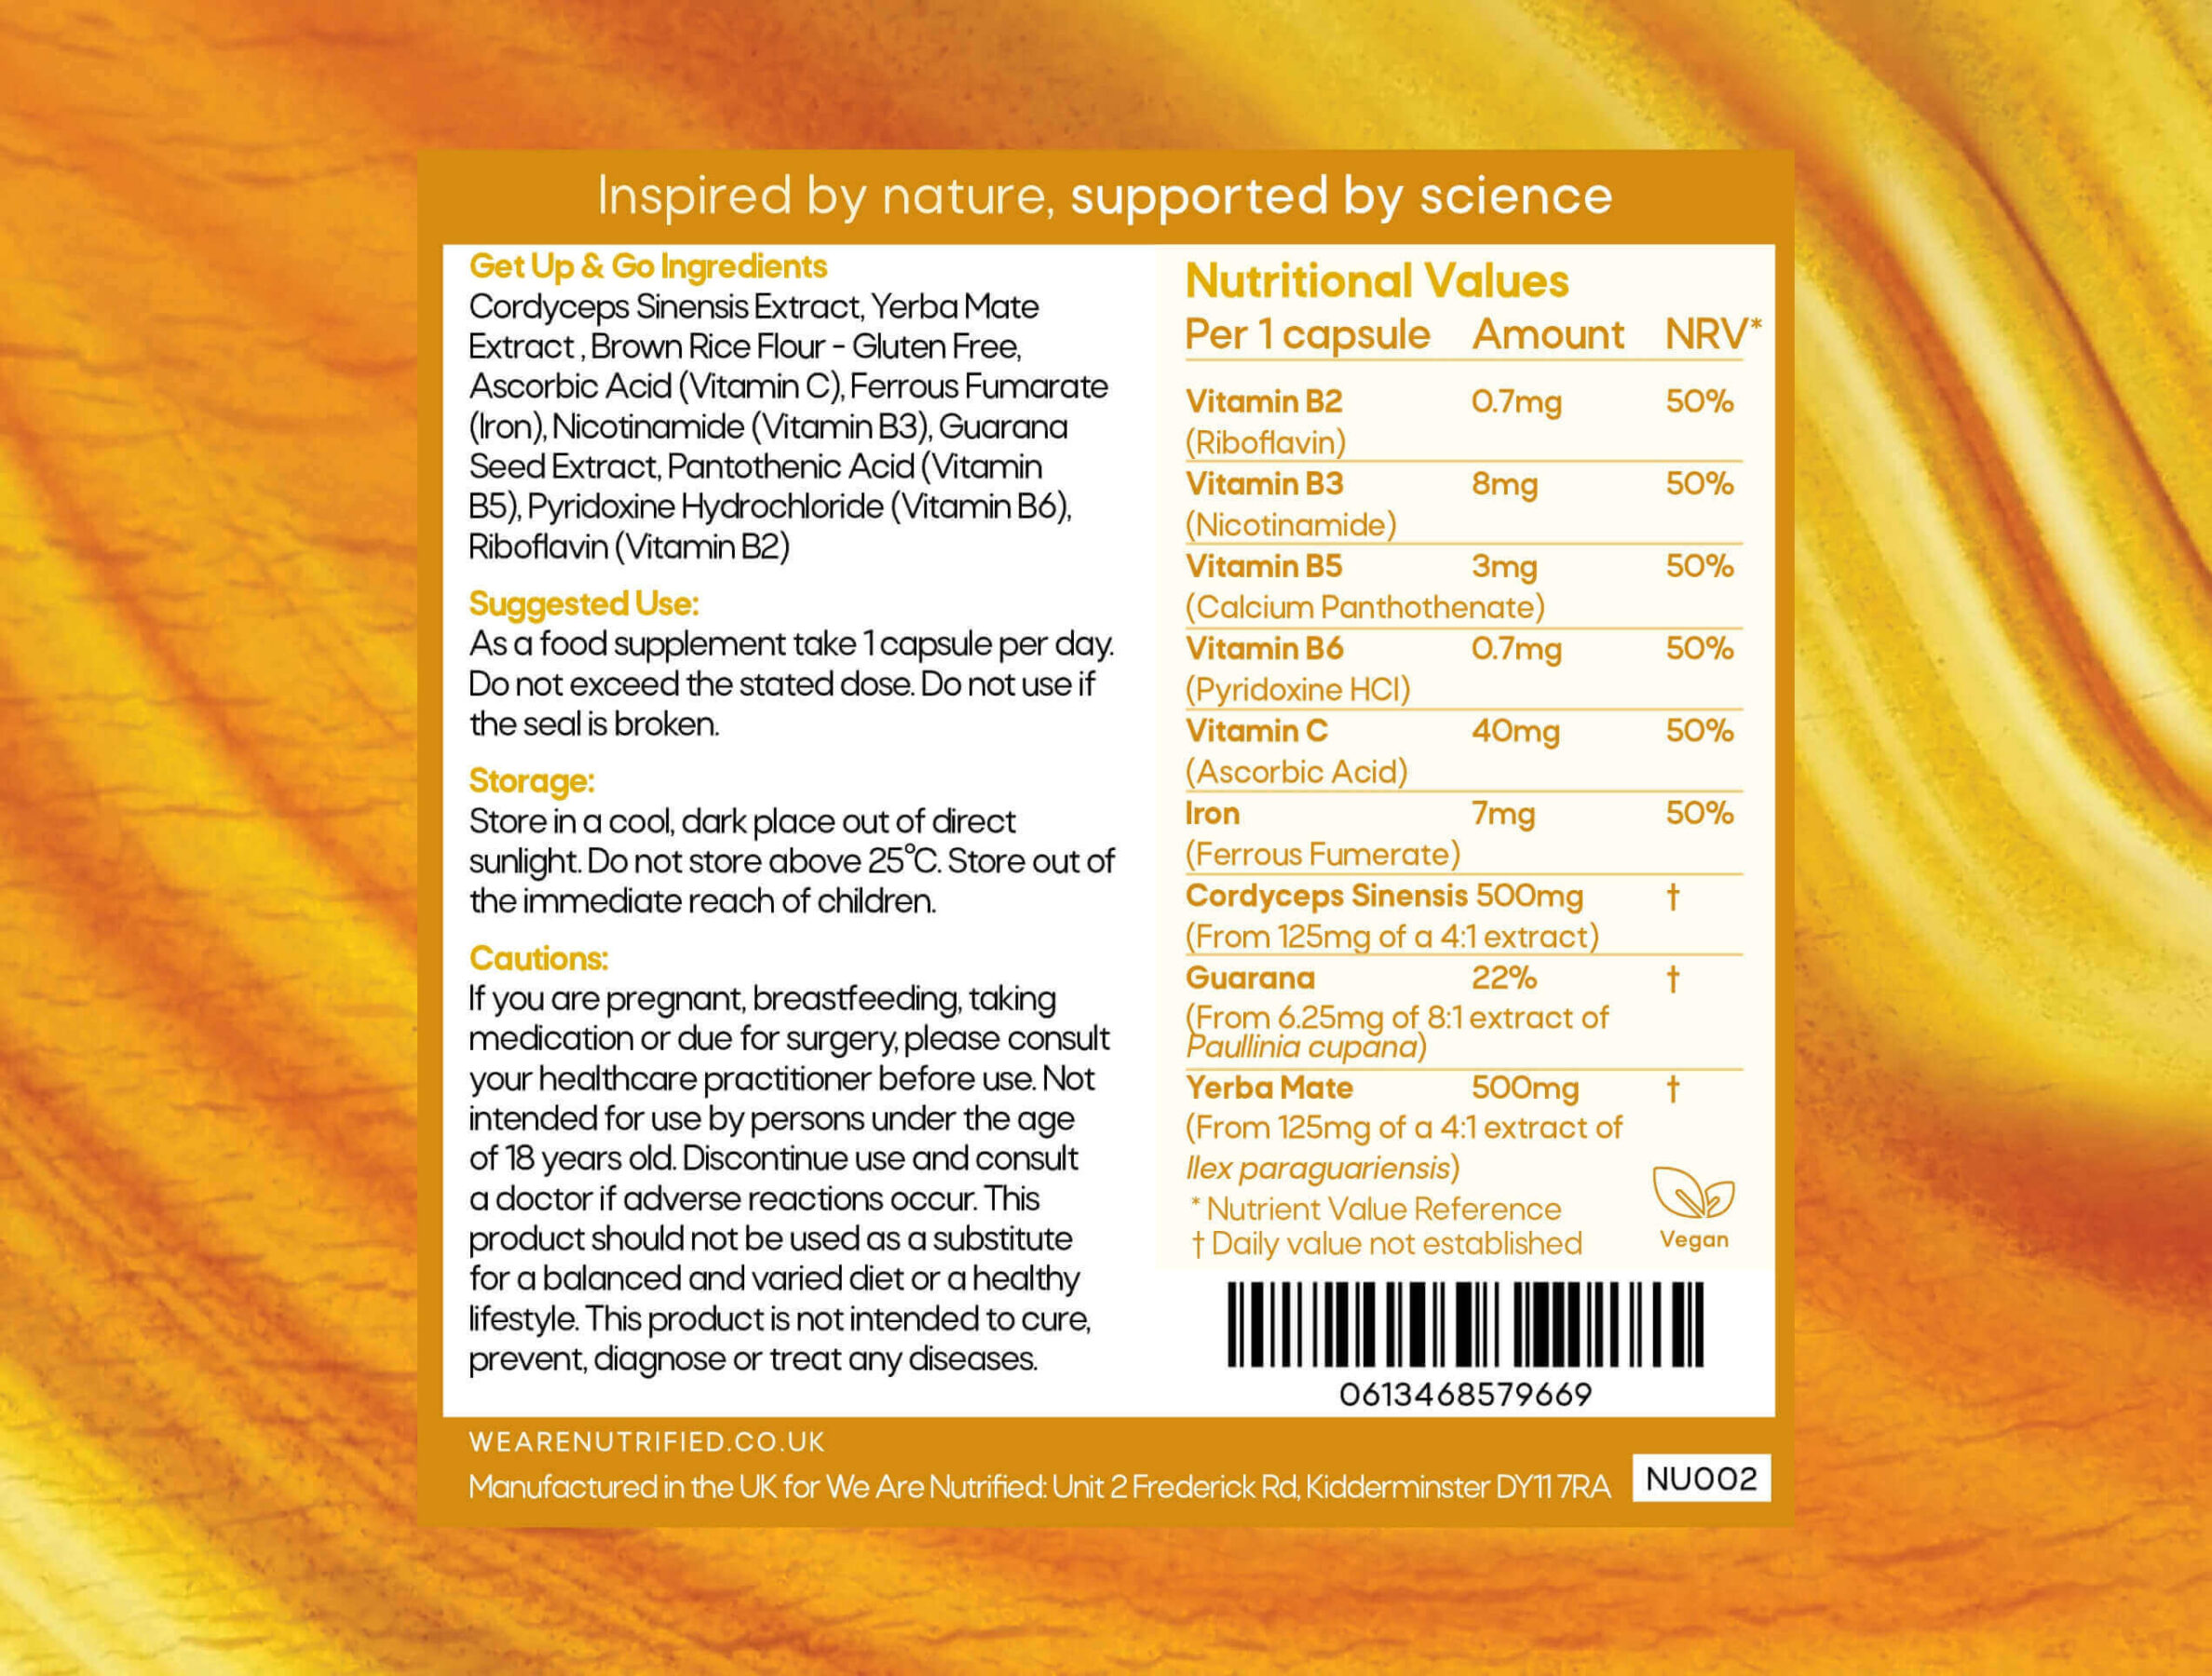 Get up and Go Vegan supplement nutritional information on yellow background